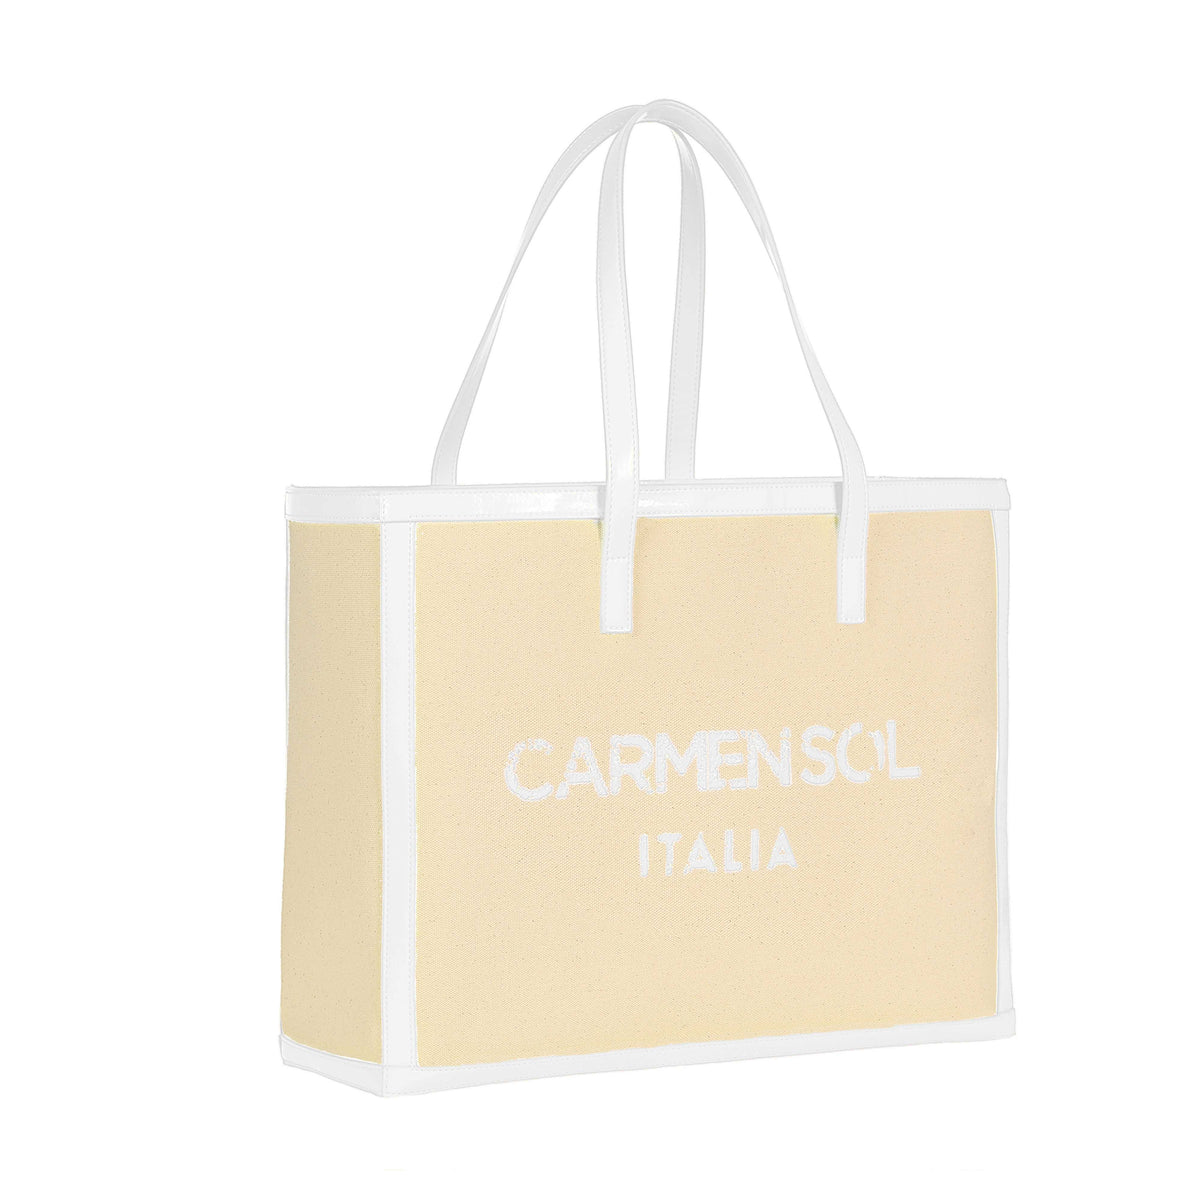 White Carmen Sol large womens tote bags perfect for any outfit